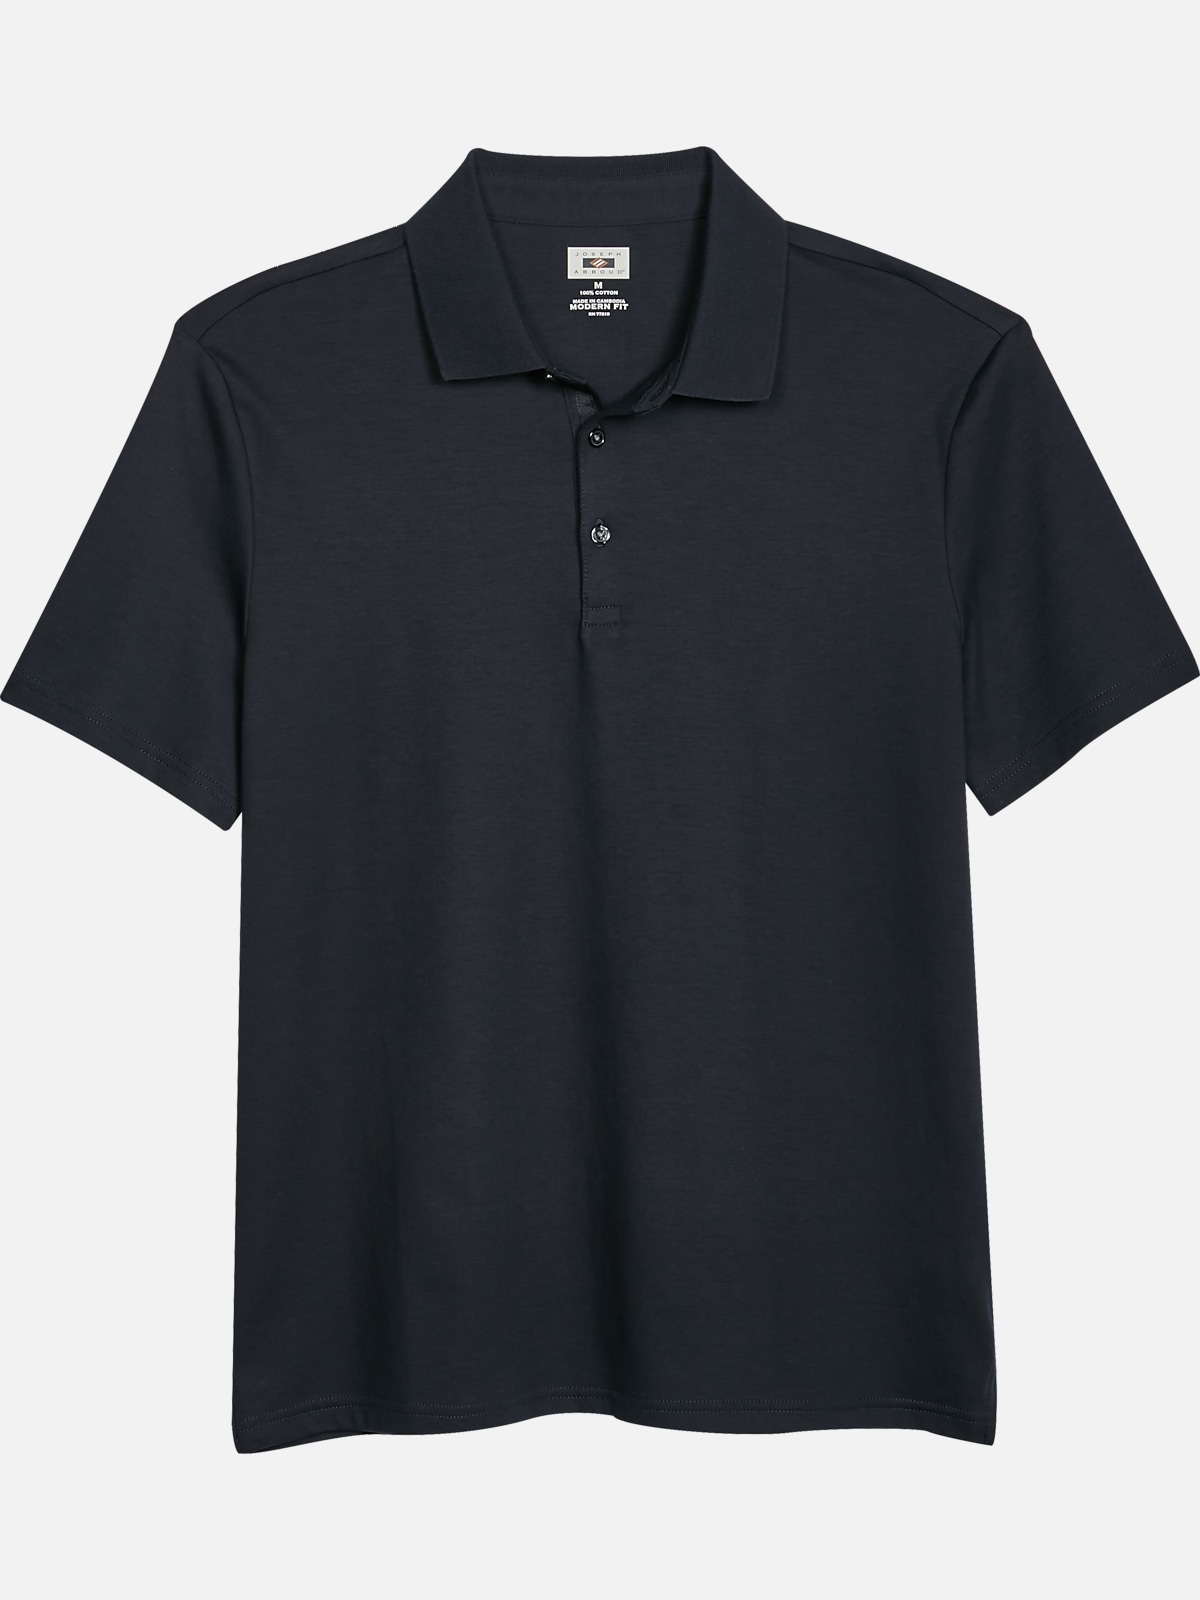 Joseph Abboud Modern Fit Luxe Cotton Polo | All Clearance $39.99| Men's ...